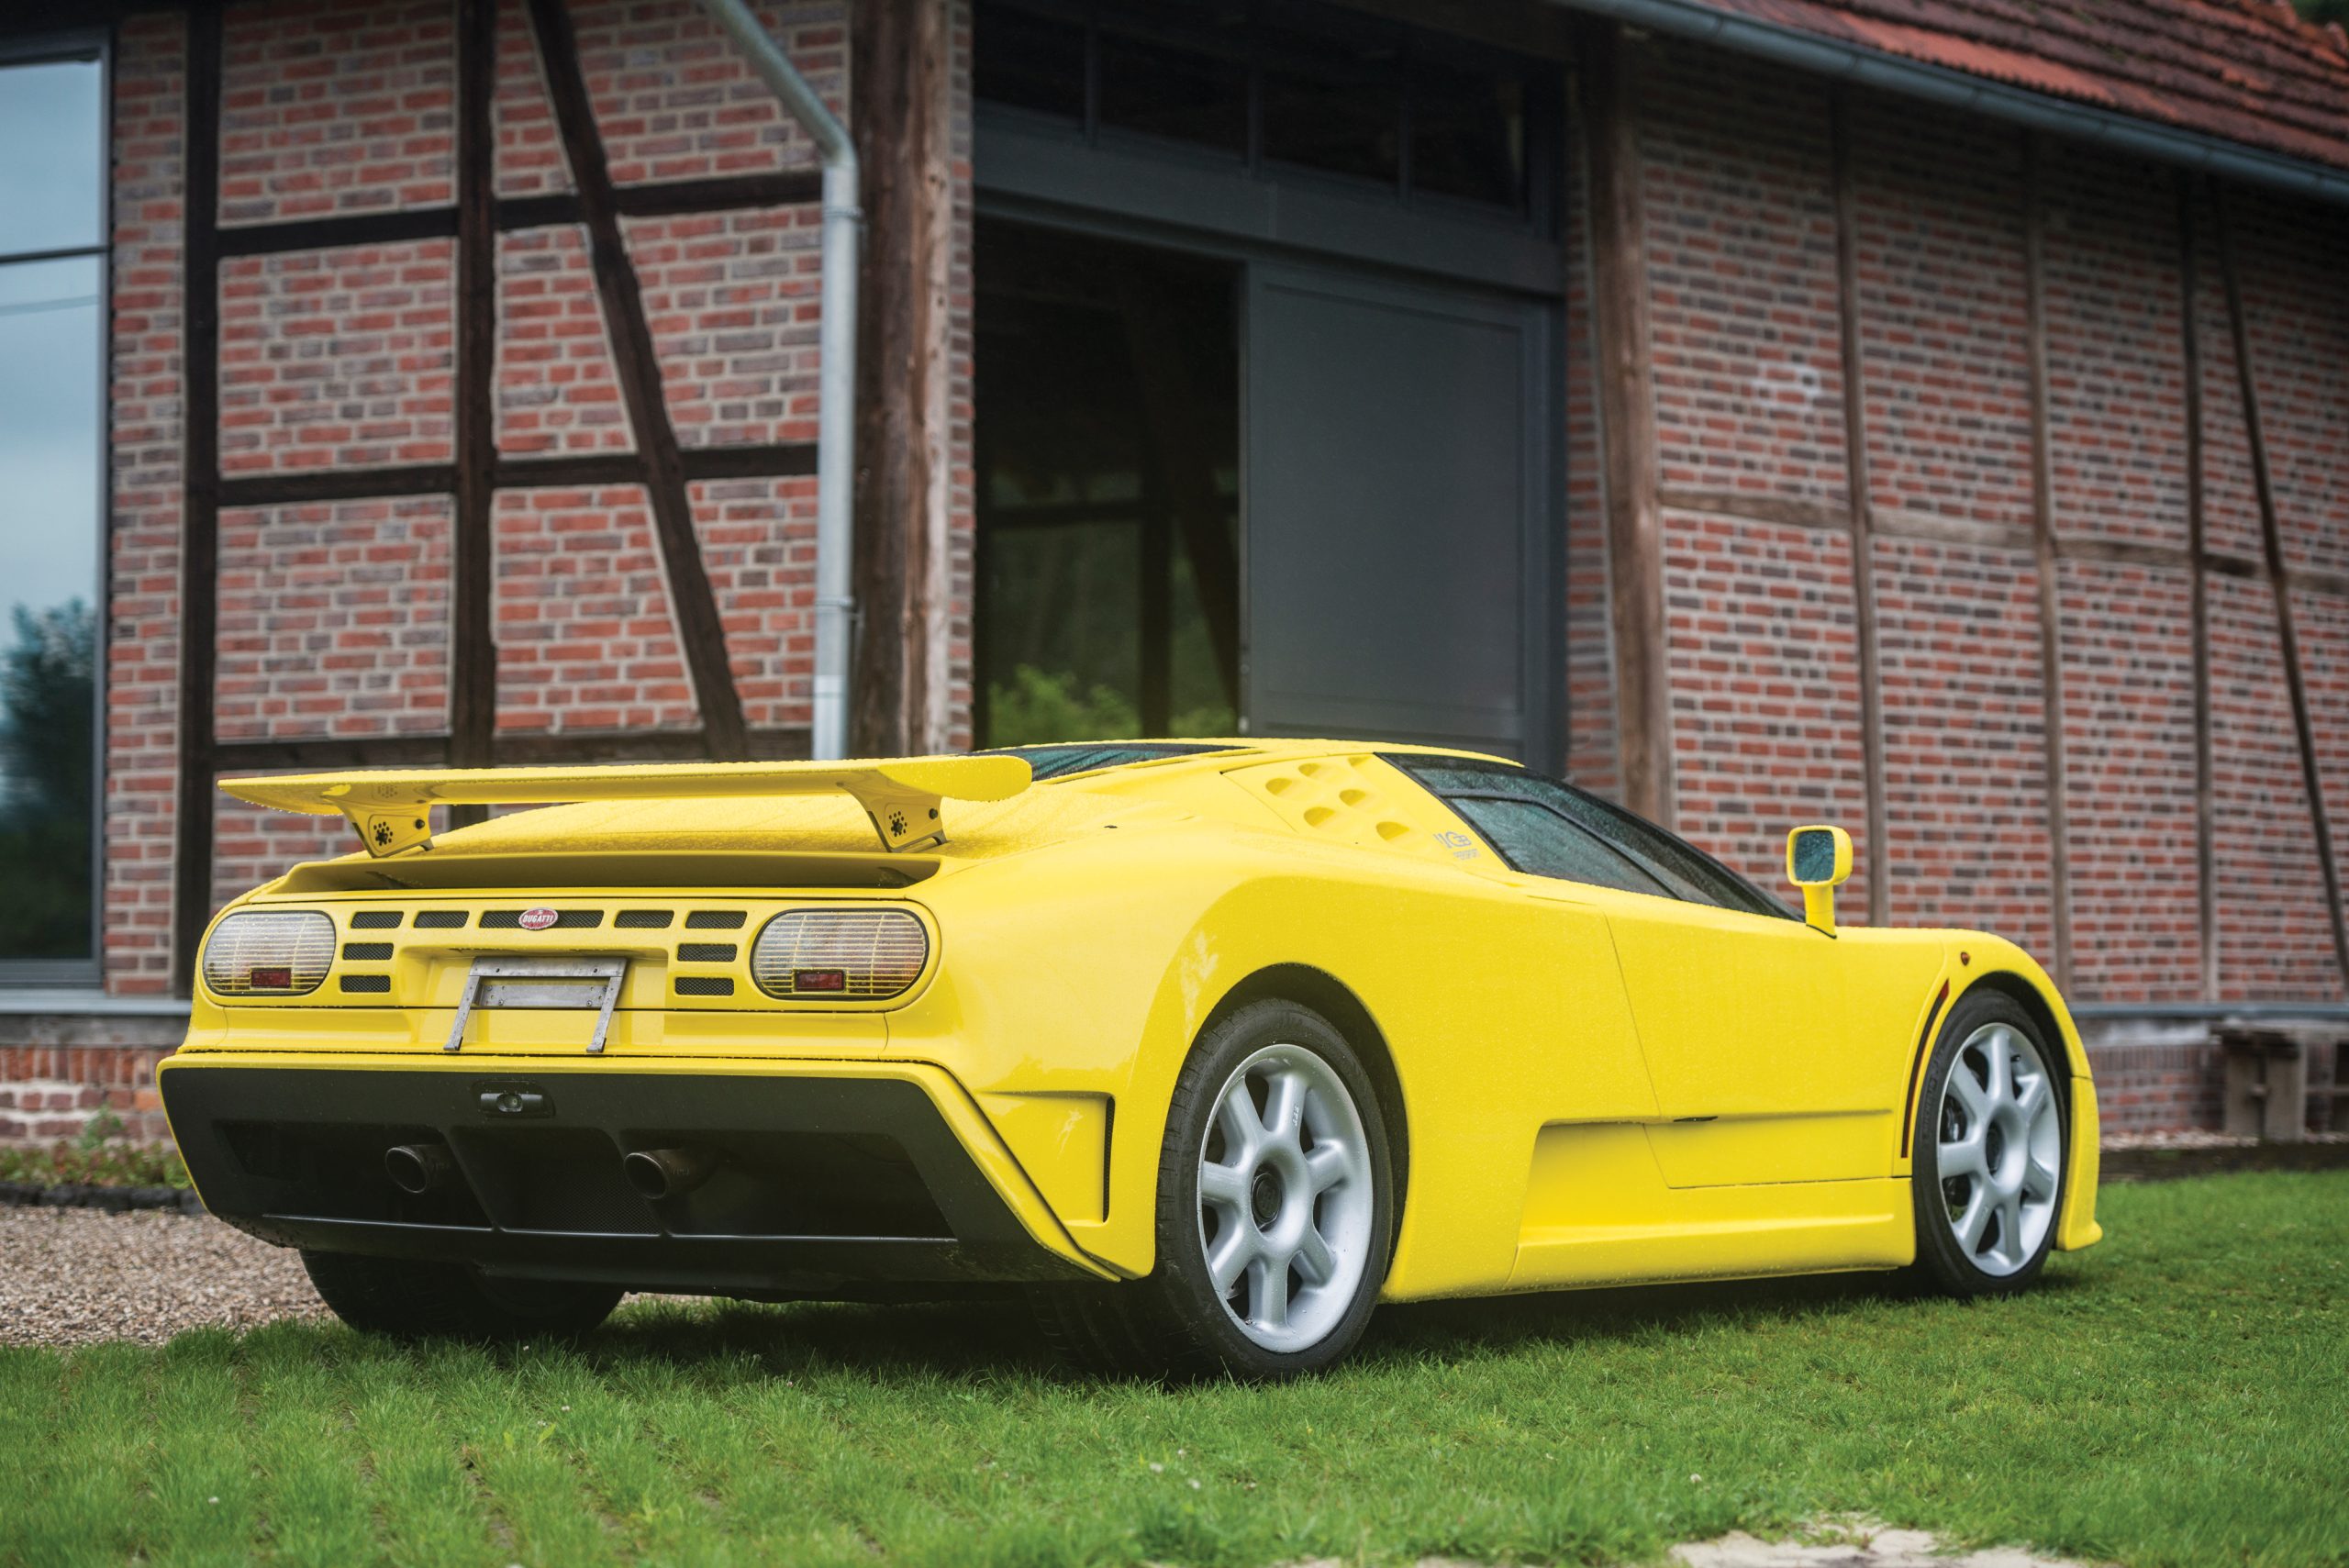  Remi Dargegen ©2015 Courtesy of RM Sotheby's